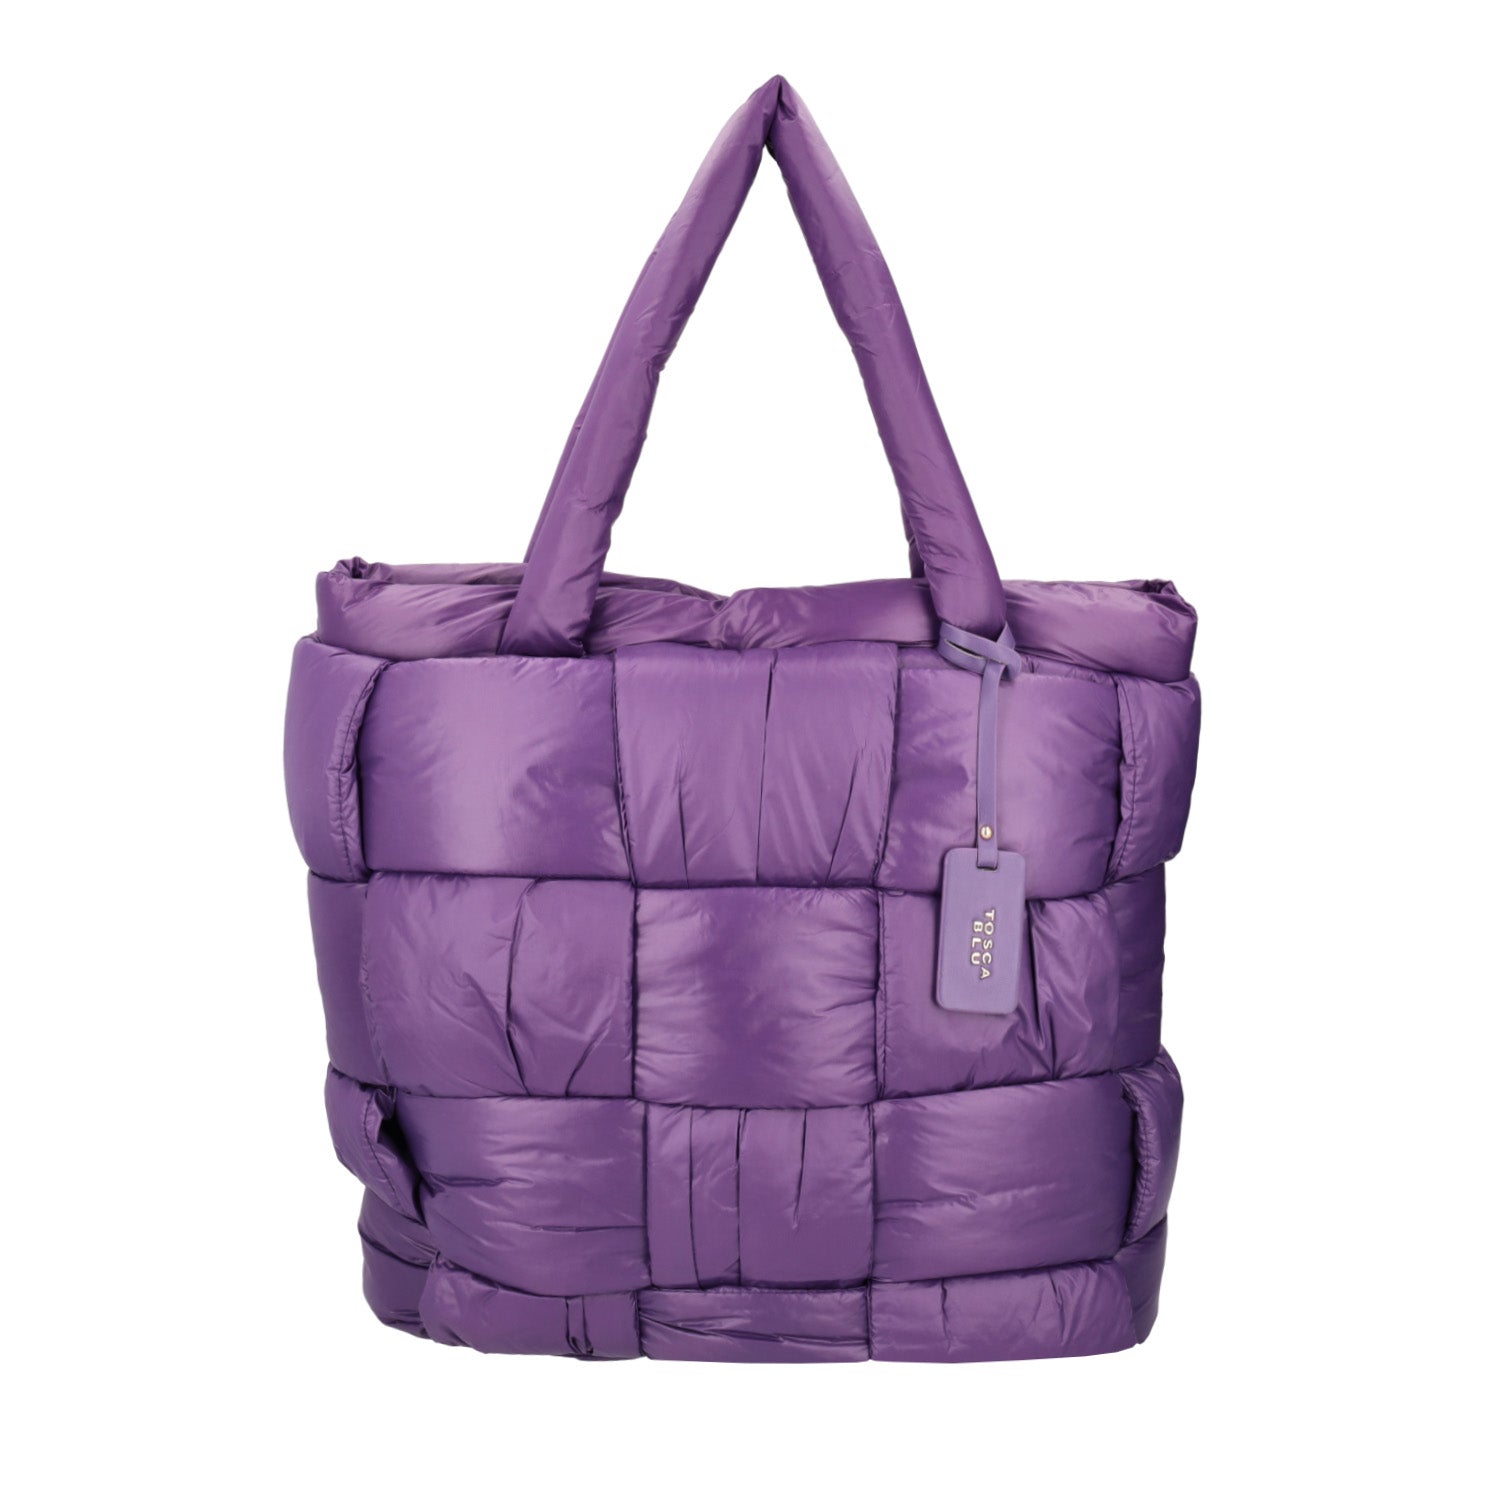 QUILTED PURPLE “SHARON” SHOPPING BAG